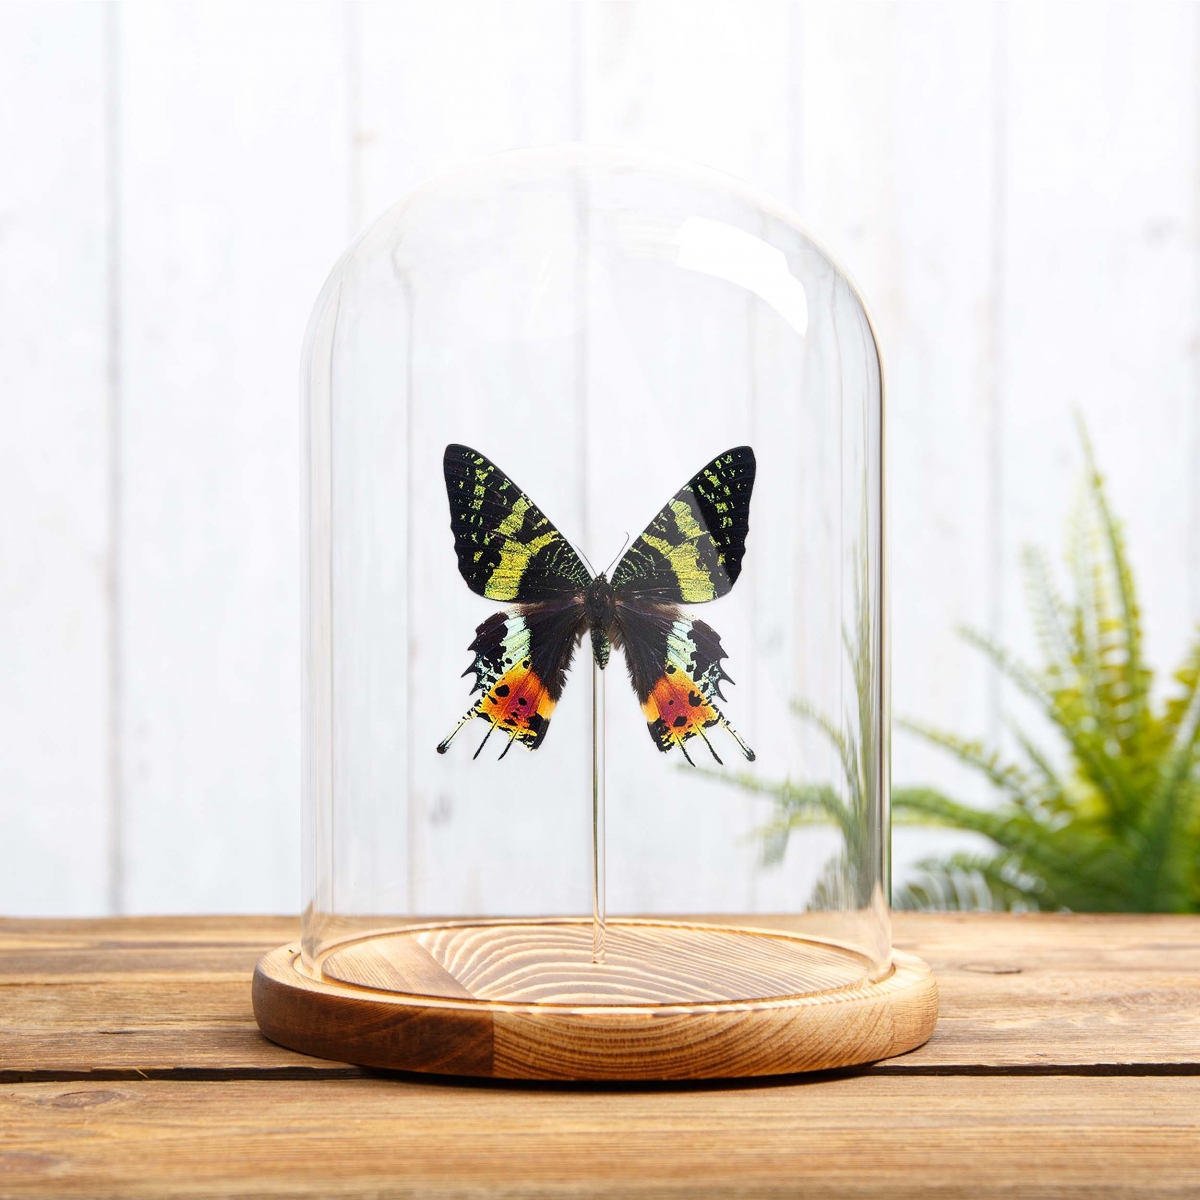 Madagascan Sunset Moth in Glass Dome with Wooden Base (Chrysiridia rhipheus)